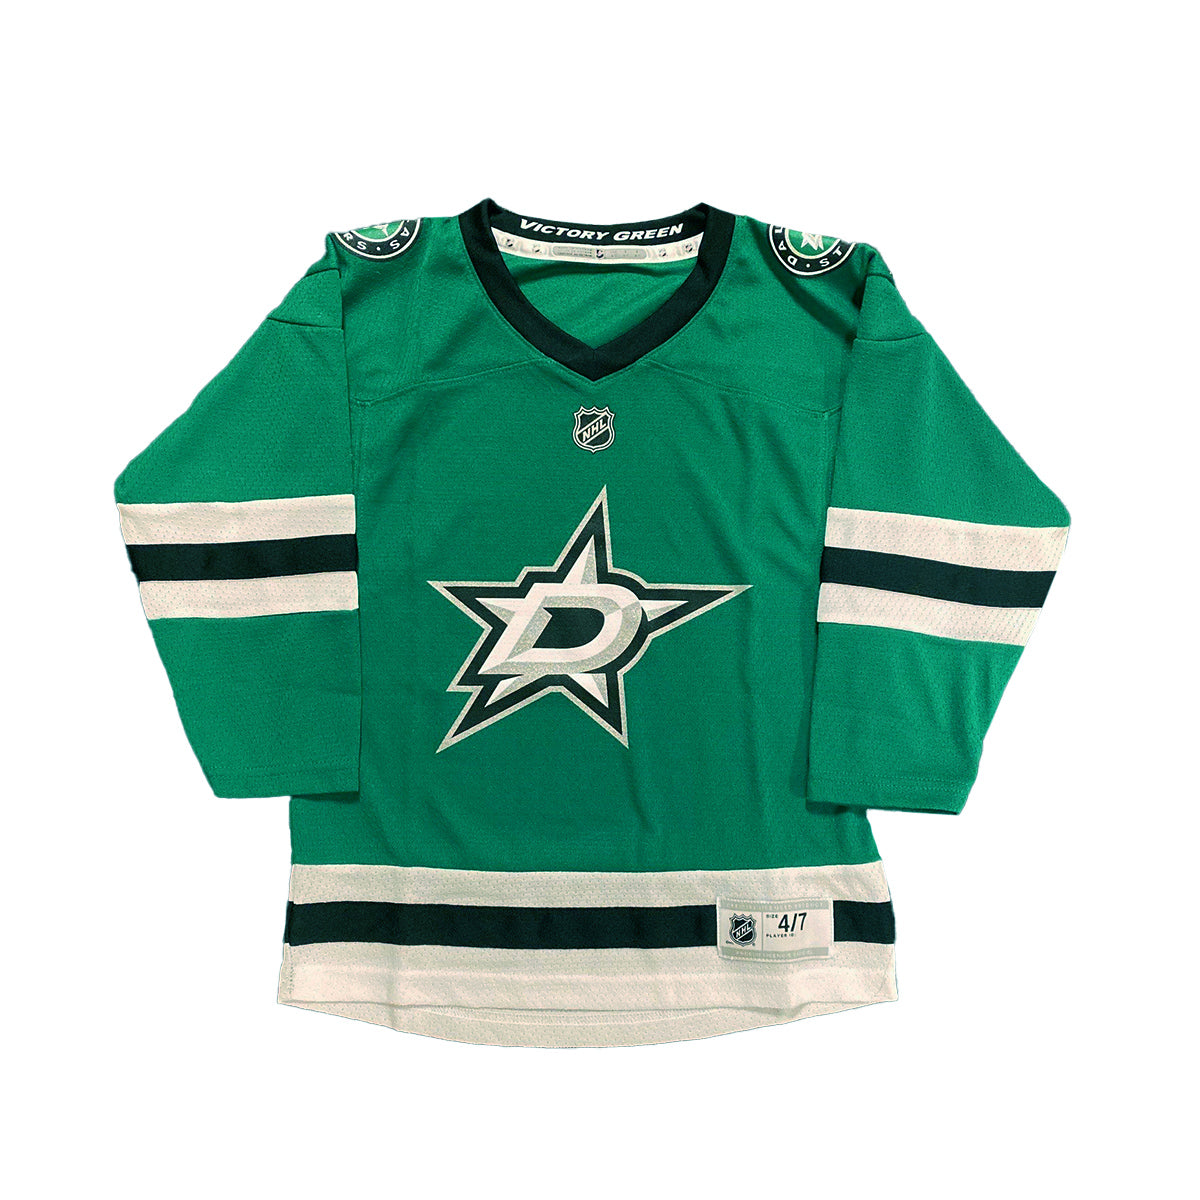 Dallas Stars Outerstuff Kids 4-7 Home Jersey in Green - Front View